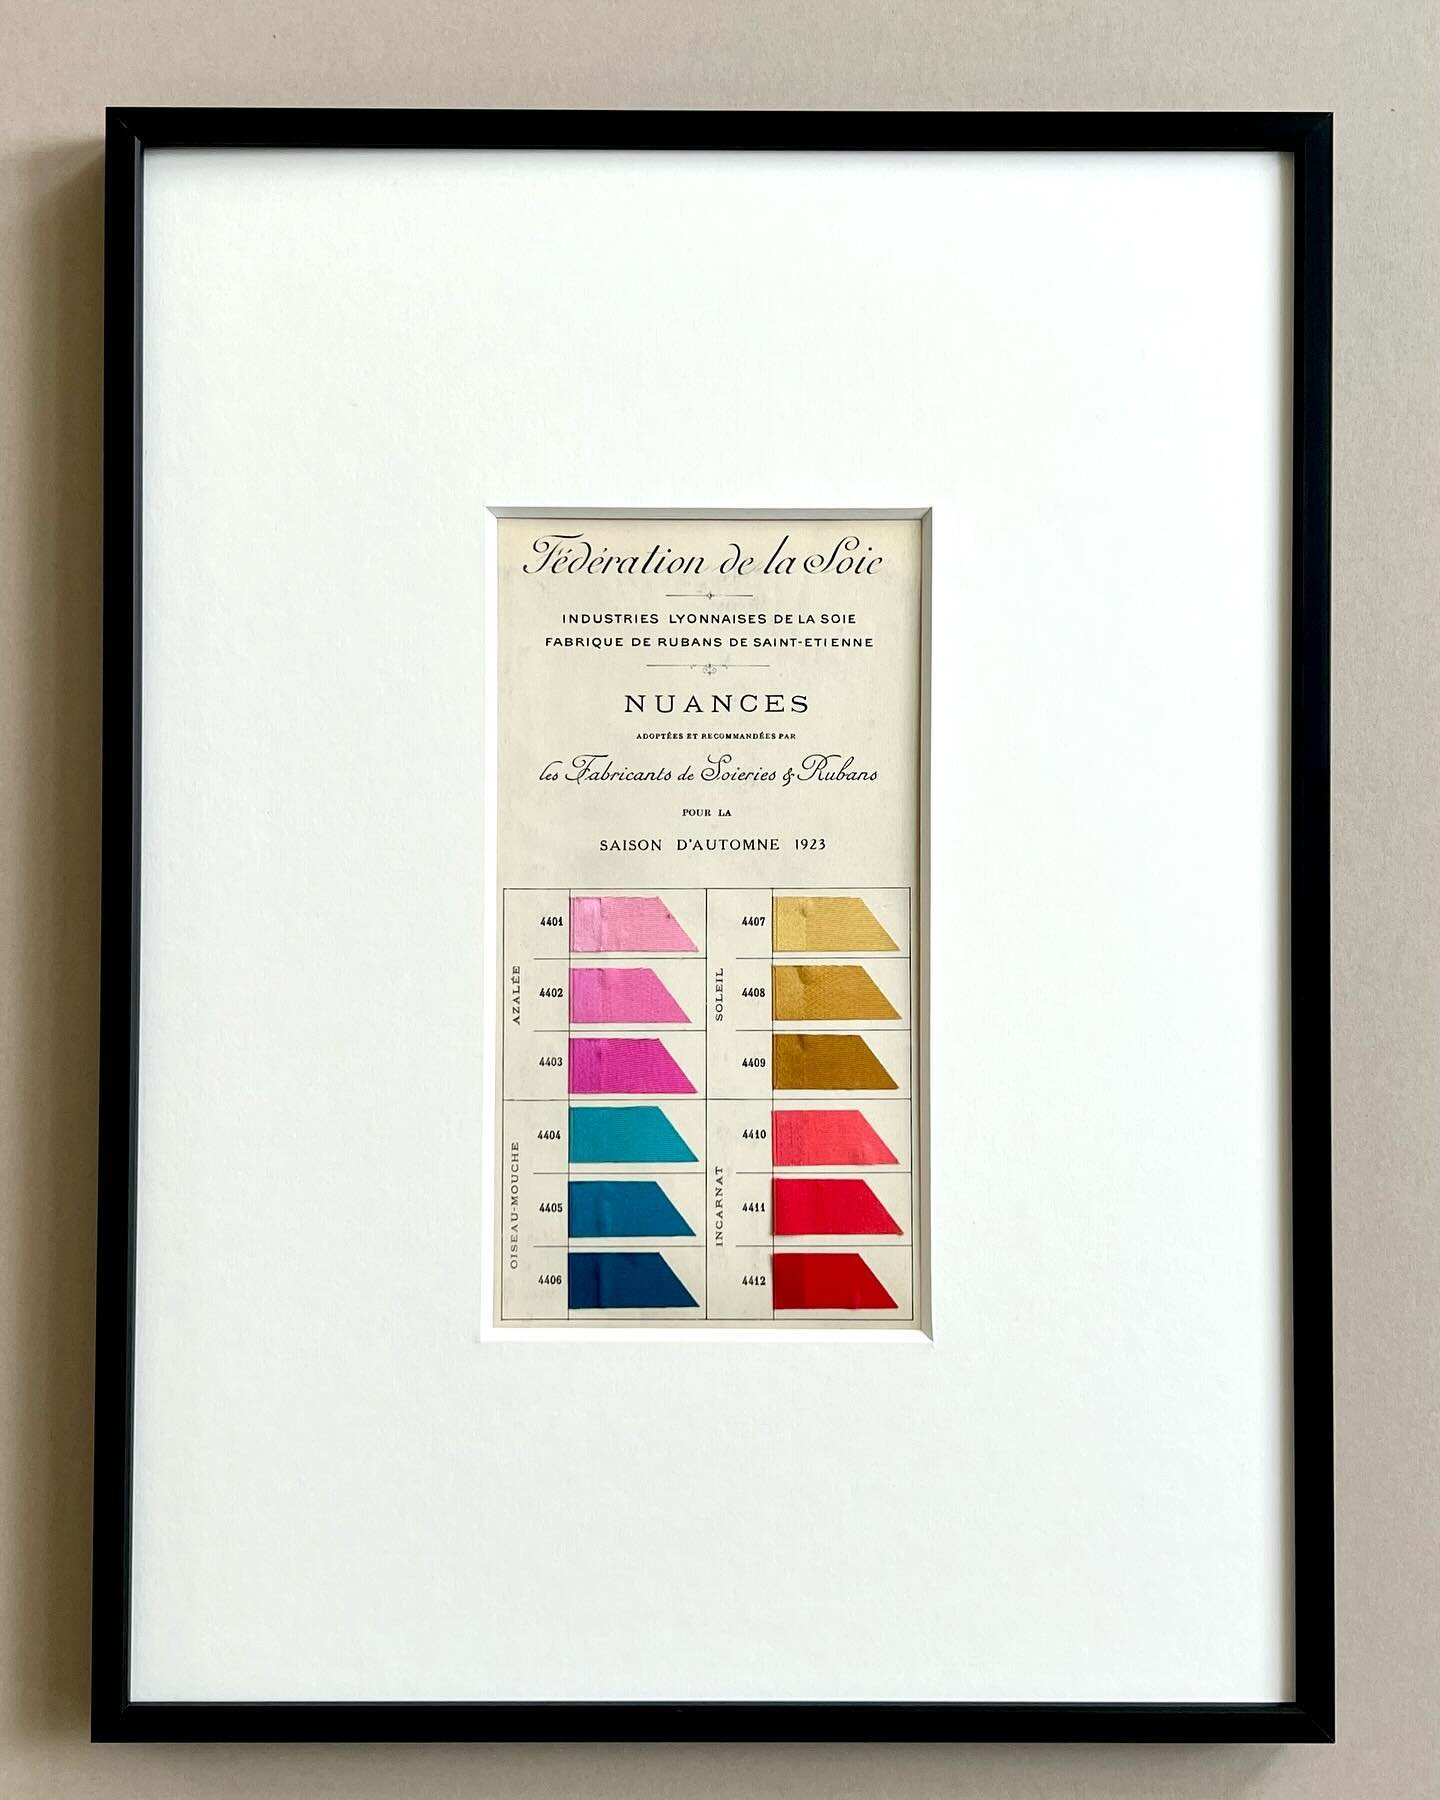 Antique French silk ribbon colour-card, 1923
Available framed with UV protection glass 
SIZE - 30 X 40cm
DM for details

#vintagesamples #colourswatches #colouredribbons #colouredsilk #silksamples #colourcard #vintagecolours #colourinspiration #desig